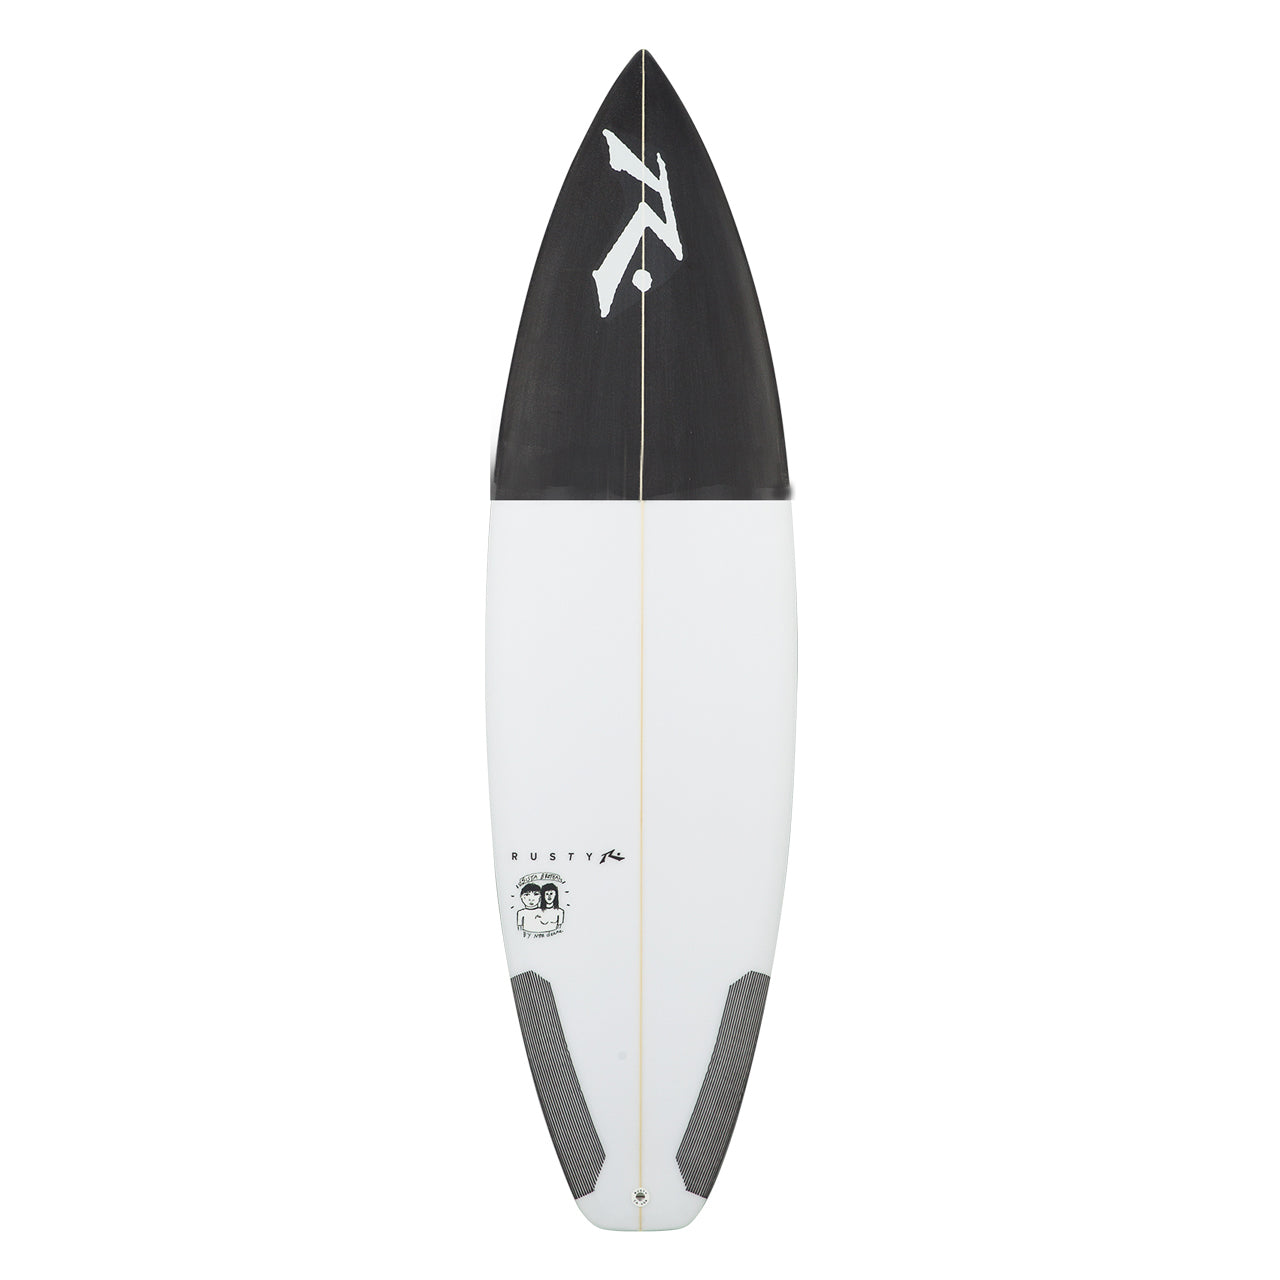 Sista Brotha - High Performance Shortboards - Rusty Surfboards - Top View